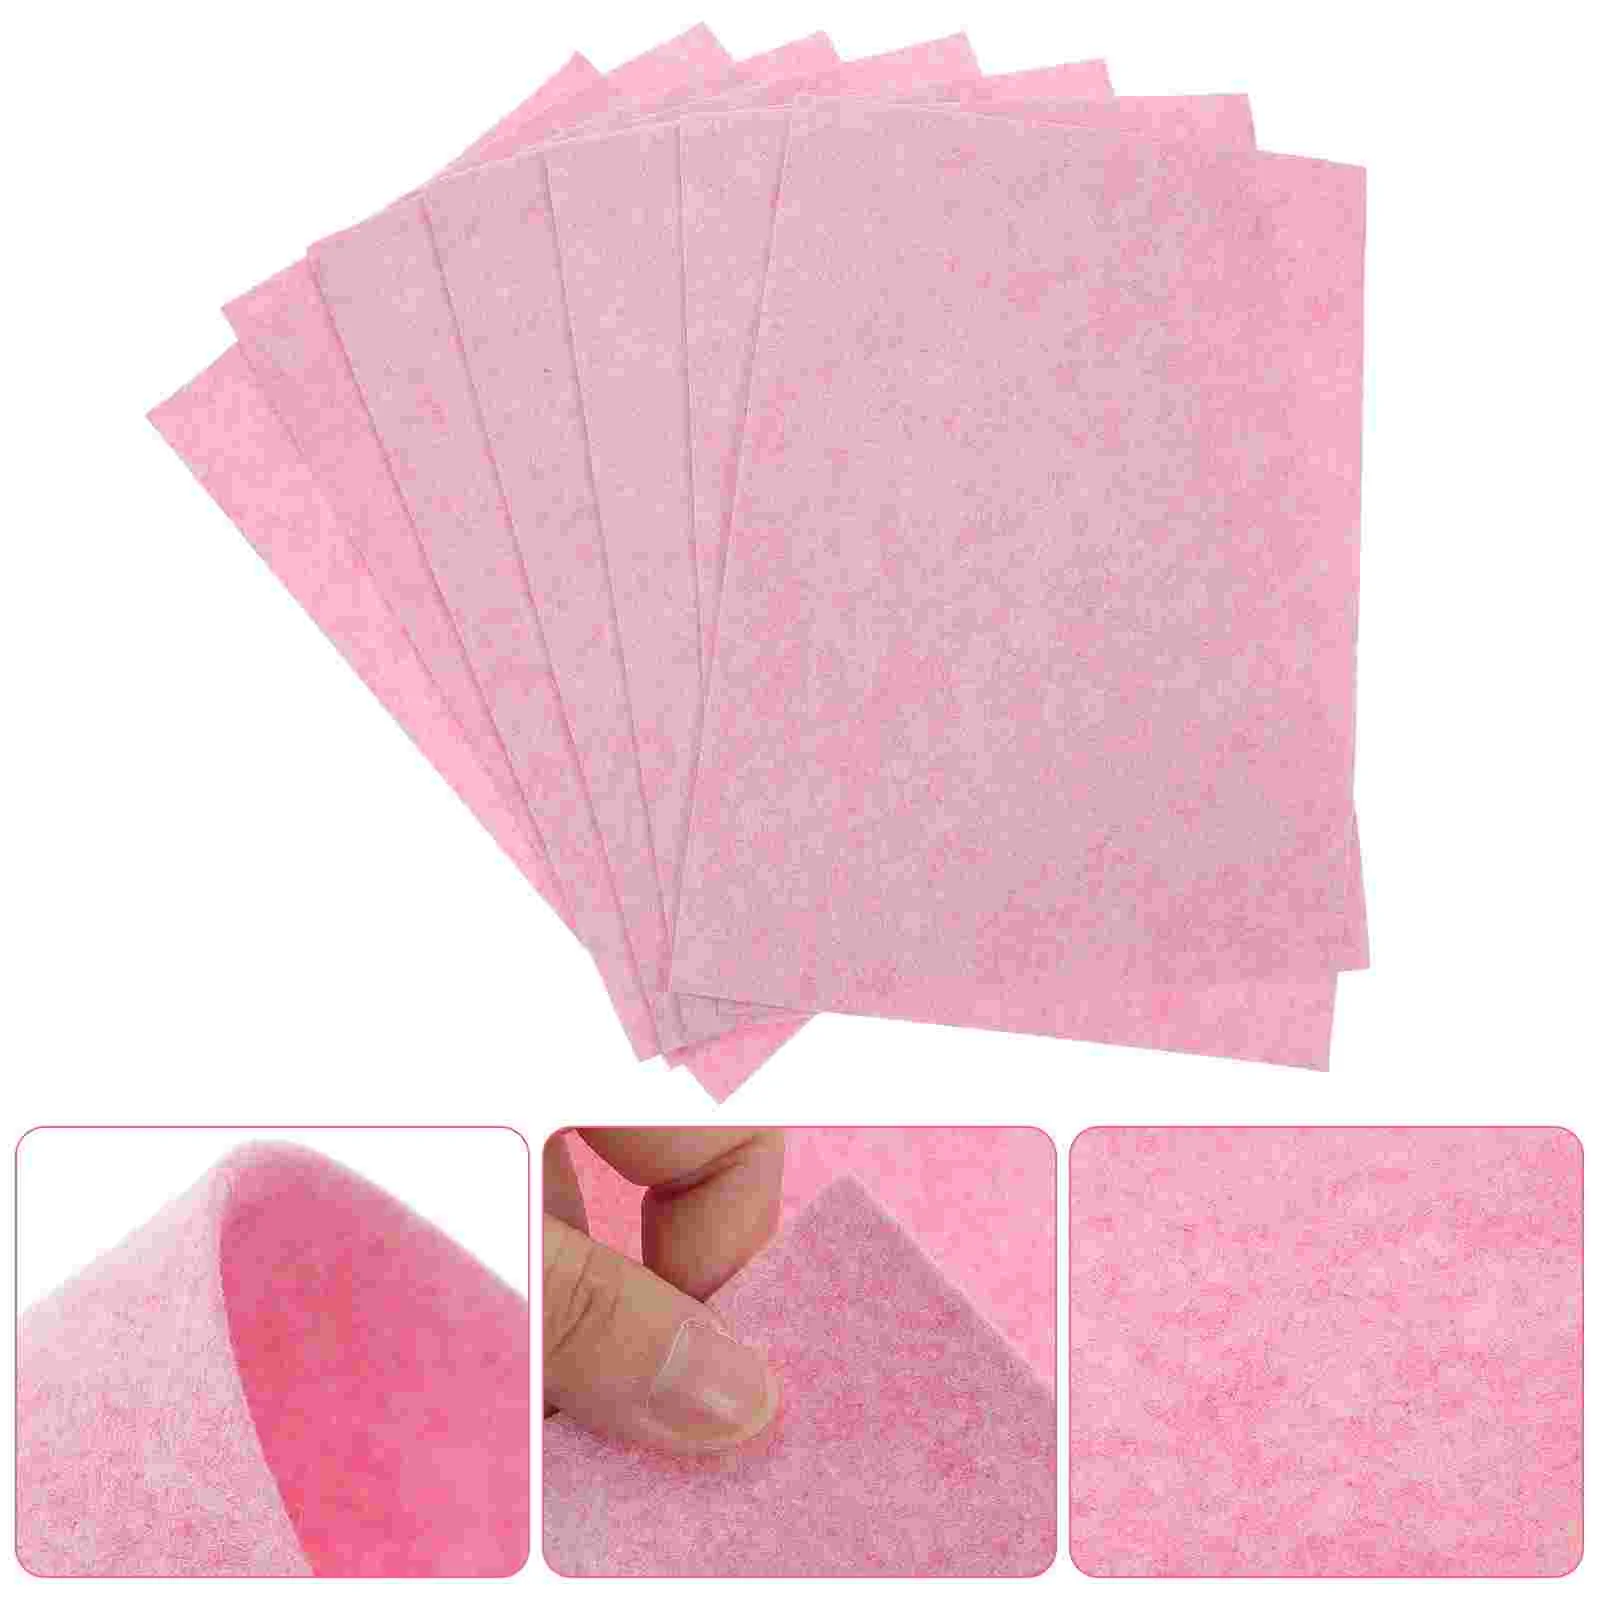 

15 Pcs Coconut Rag Dishcloths Kitchen Washing Dishes Cleaning Supply Towel Absorb Water Towels Rags